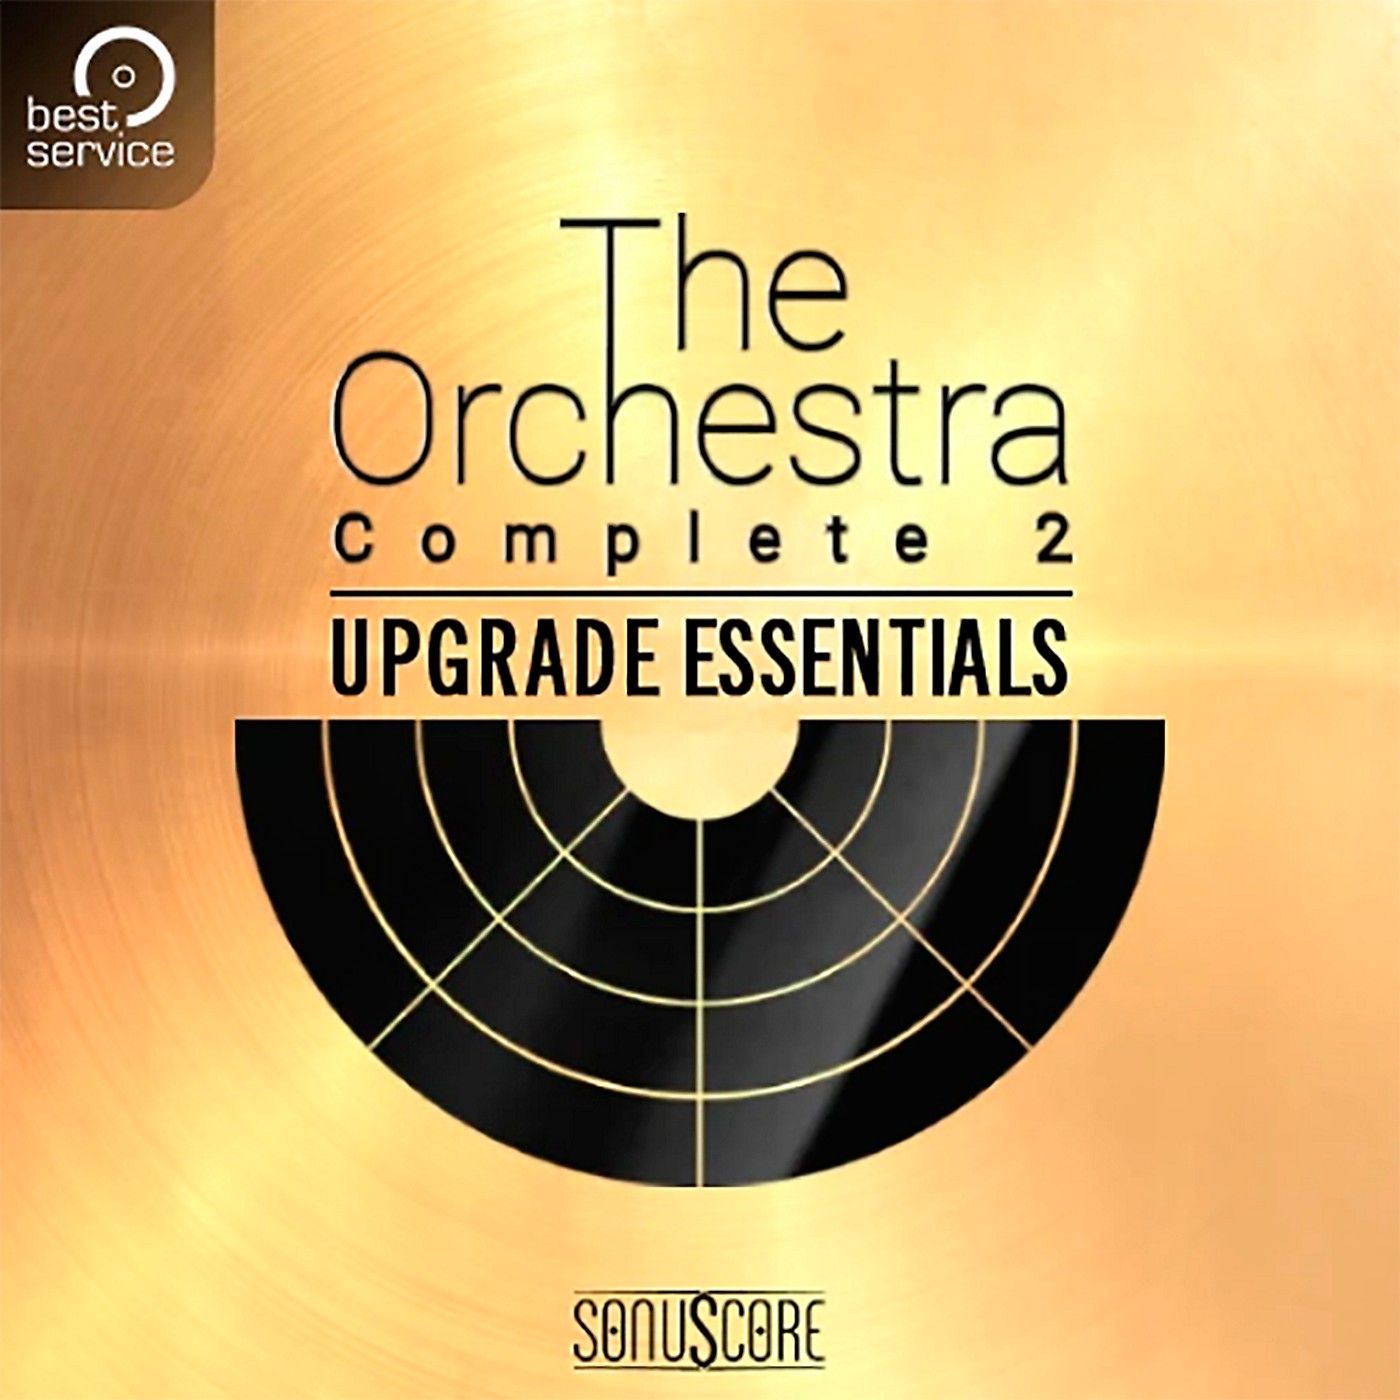 Best Service The Orchestra Complete 2 Upgrade from Orchestra Essentials thumbnail